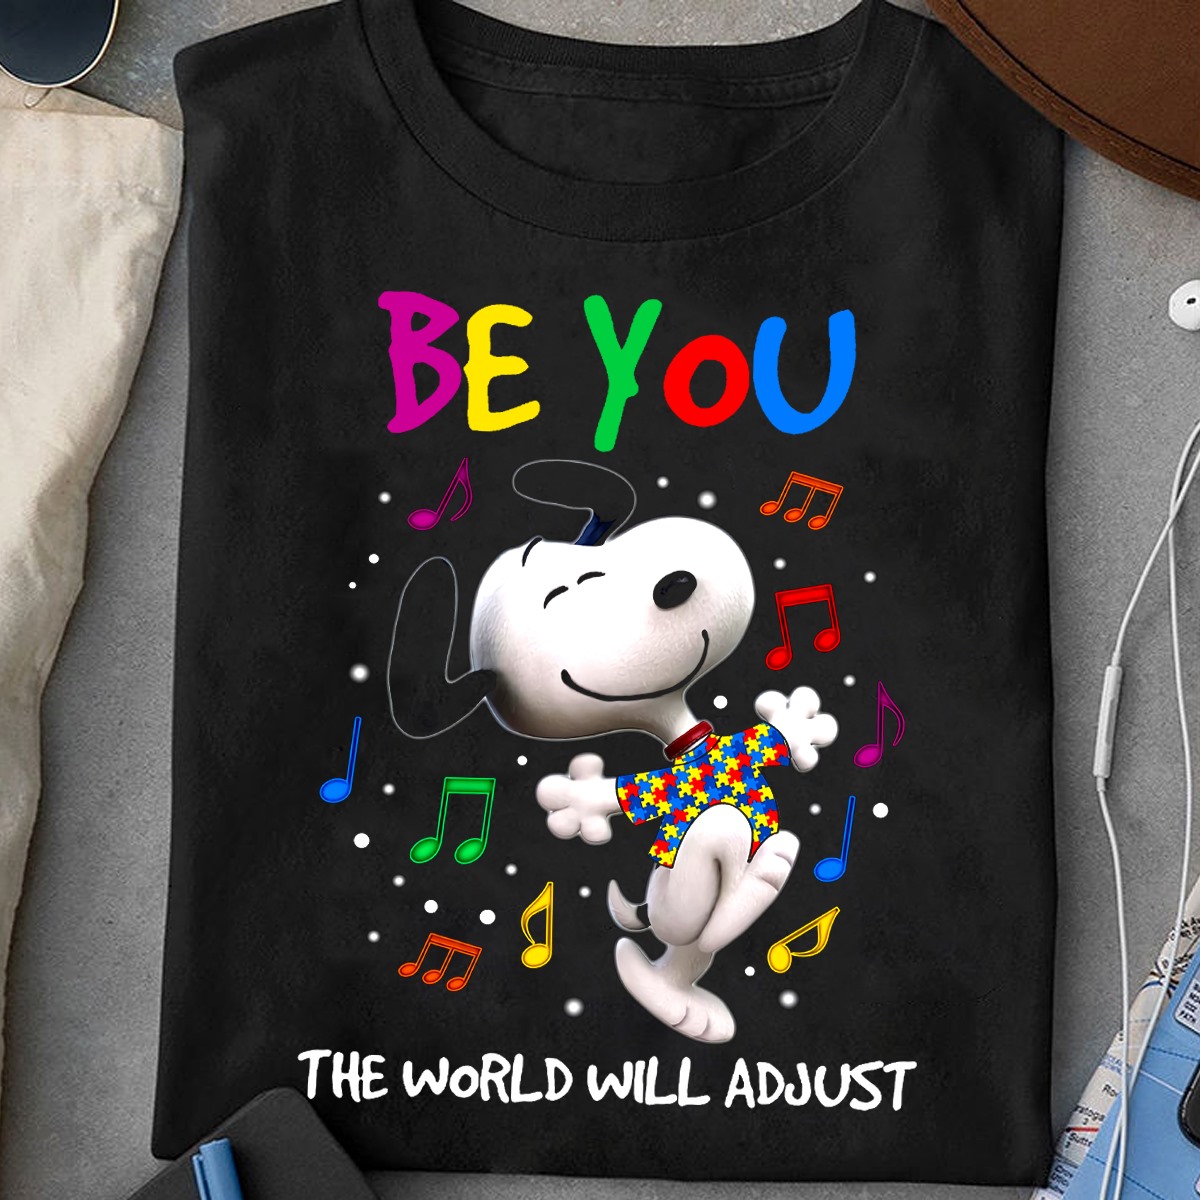 Be you the world will adjust – Snoopy dog with musical note